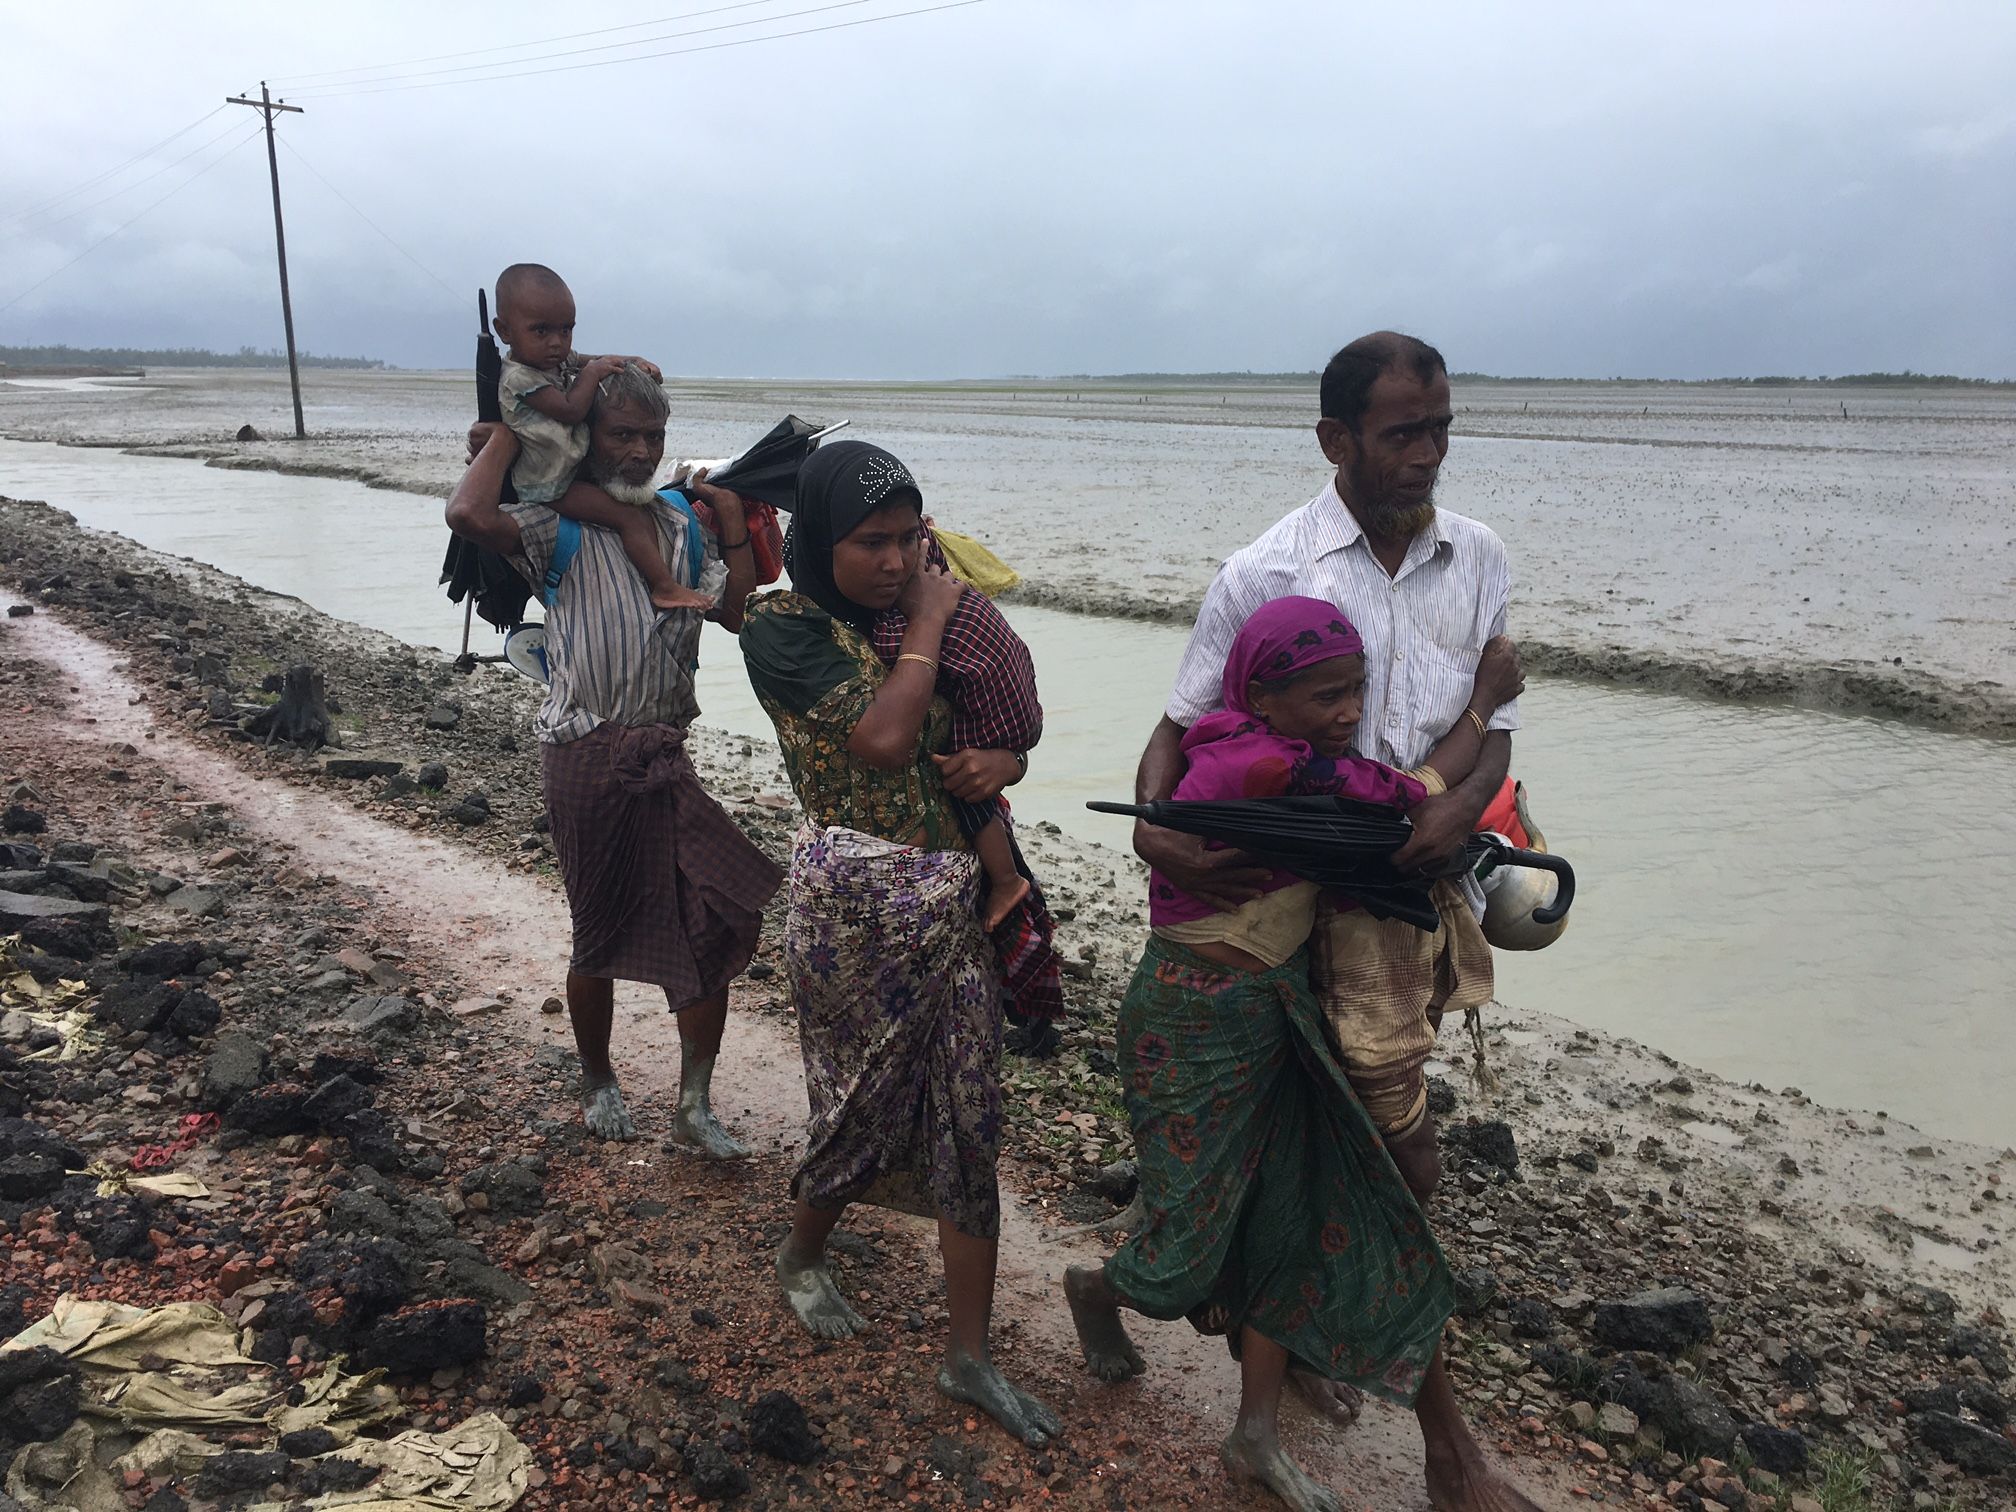 A Rohingya Muslim family displaced by violence in Myanmar heads toward refugee camps near the Bangladesh coast. September 2017. Image by Jason Motlagh.